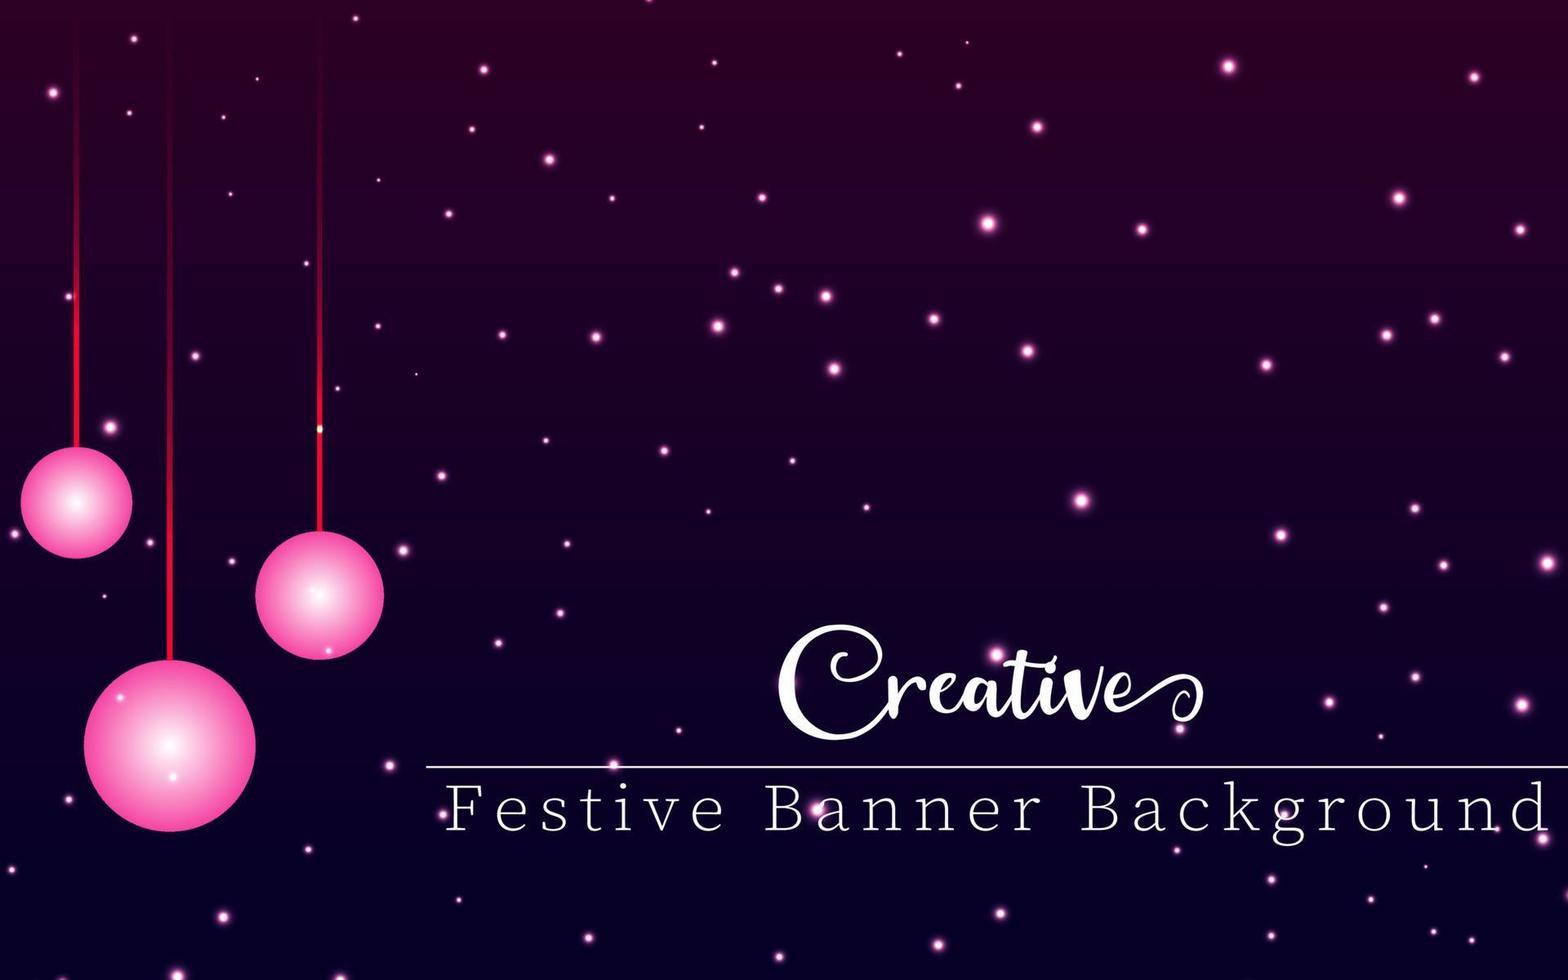 creative festive background with glowing pink balls and sparkling stars, creative festival design to utilize your festive design, Creative banner for festive season promotion and advertisemen vector